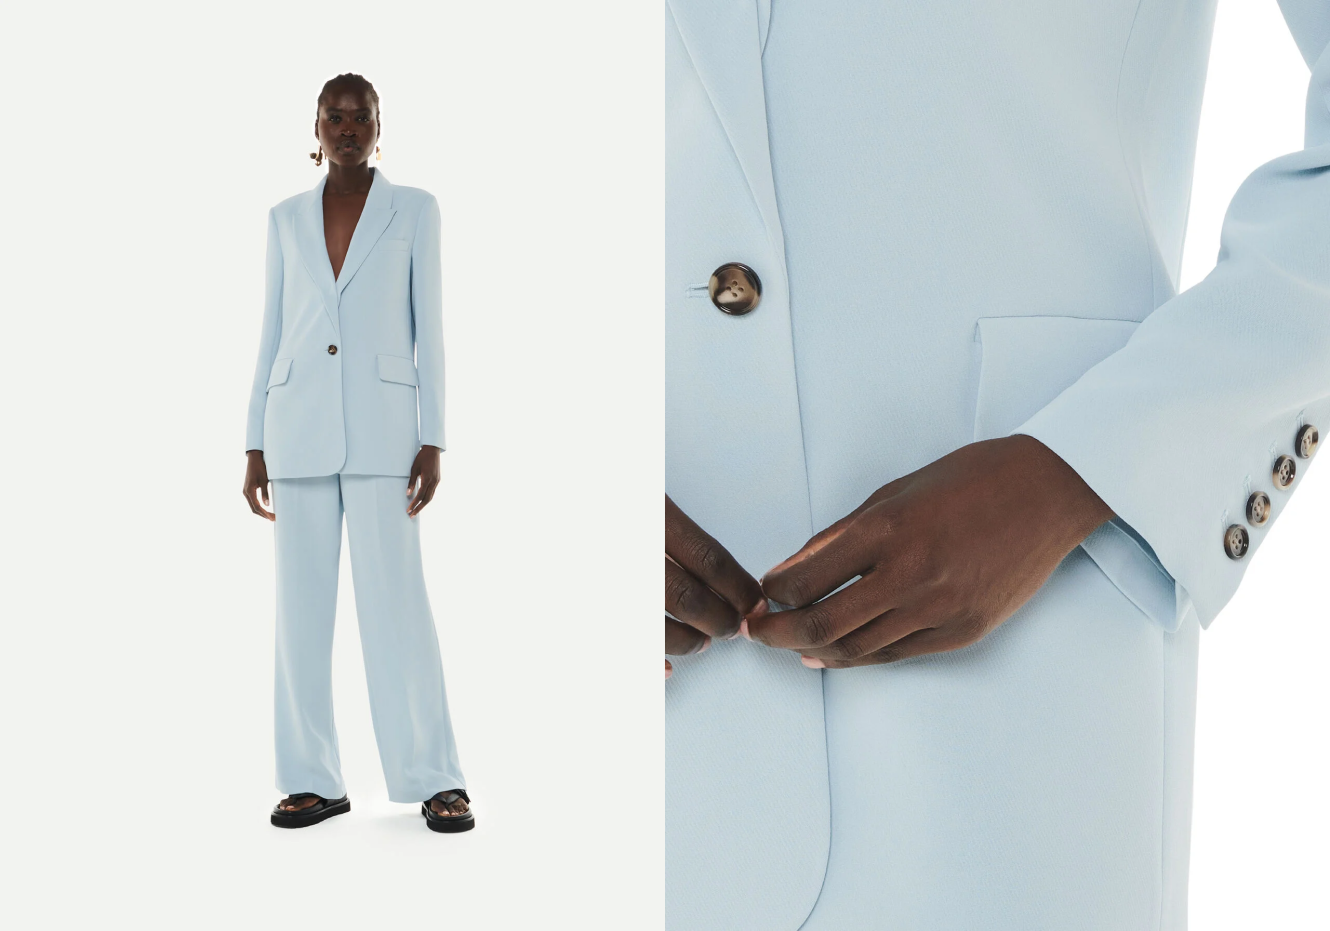 ZARA presented tailored suits SpringSummer 2017 collection